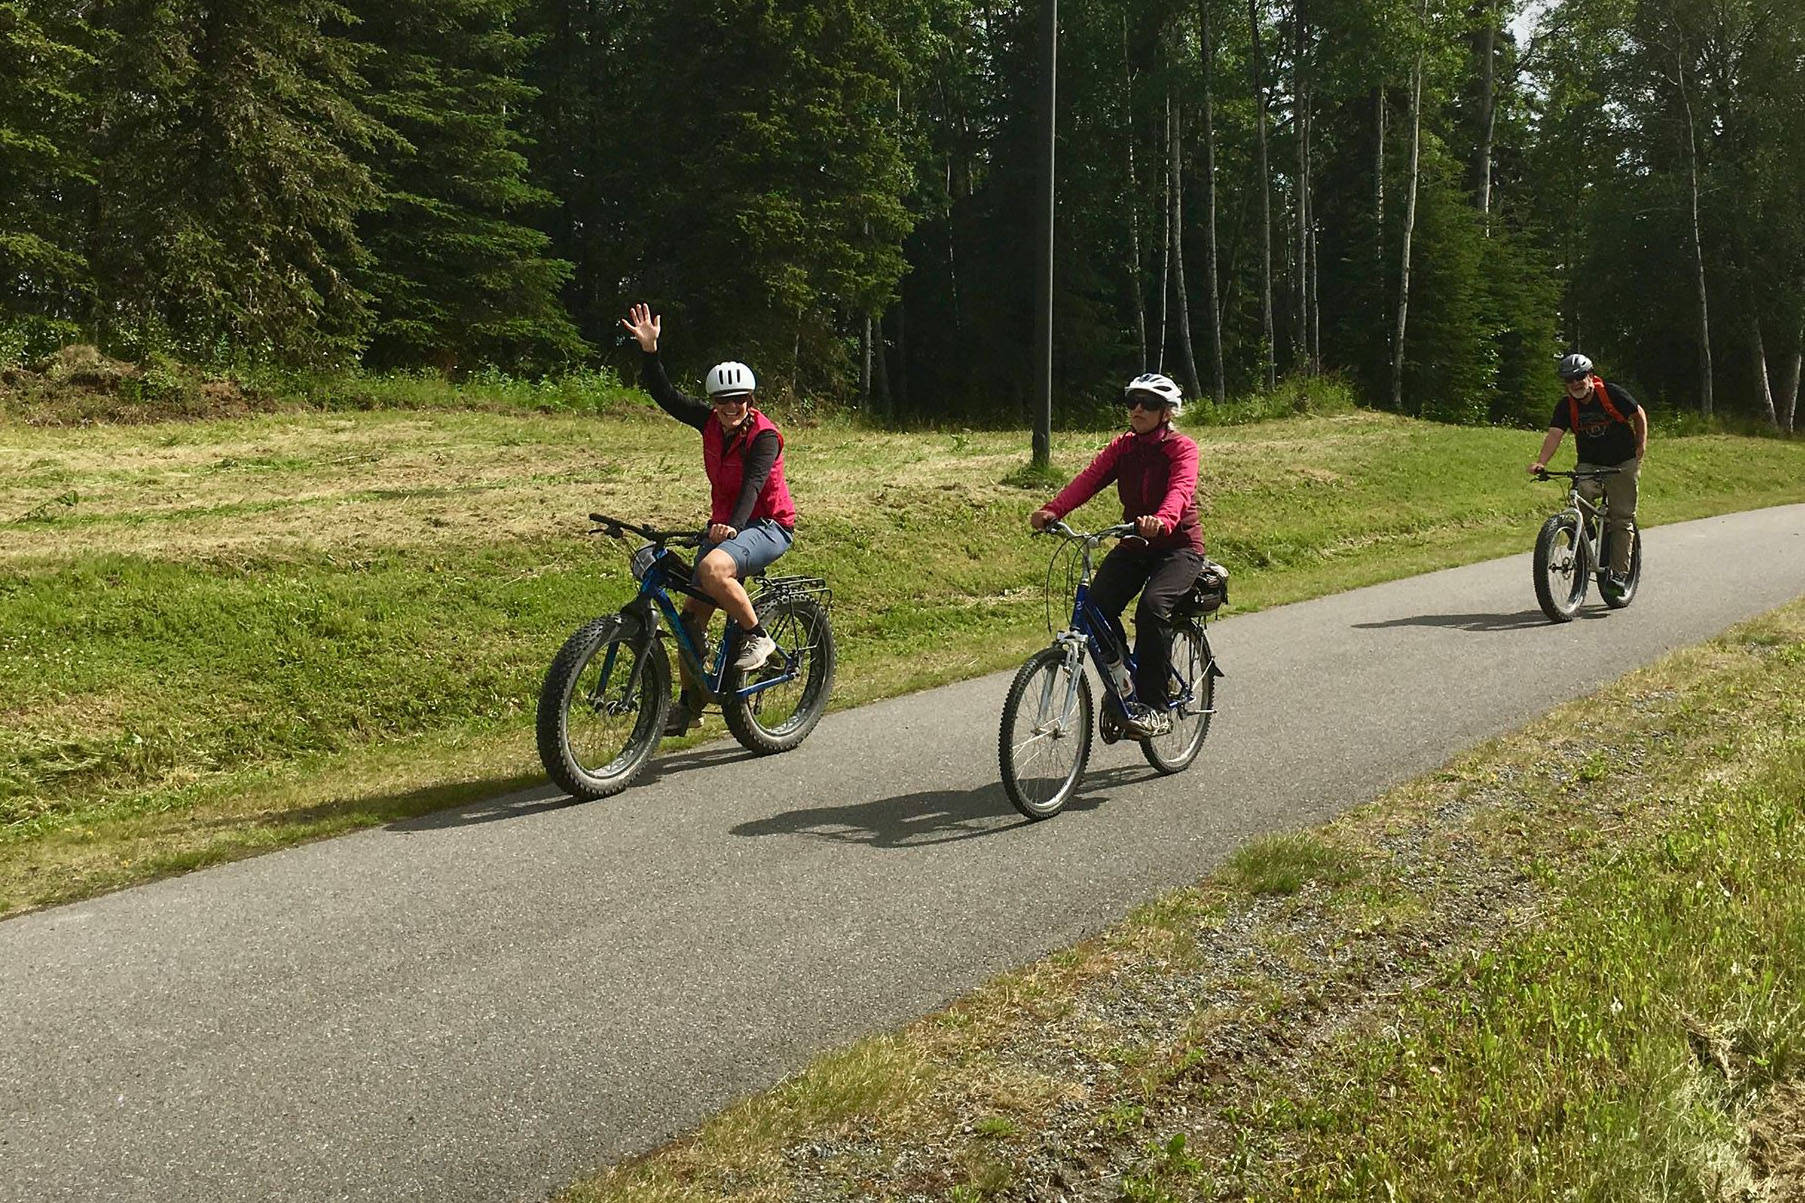 Bicyclists participate in a Full Moon Bike Ride in Soldotna, Alaska on July 27, 2018. (Photo courtesy of Jenn Tabor/BiKS)